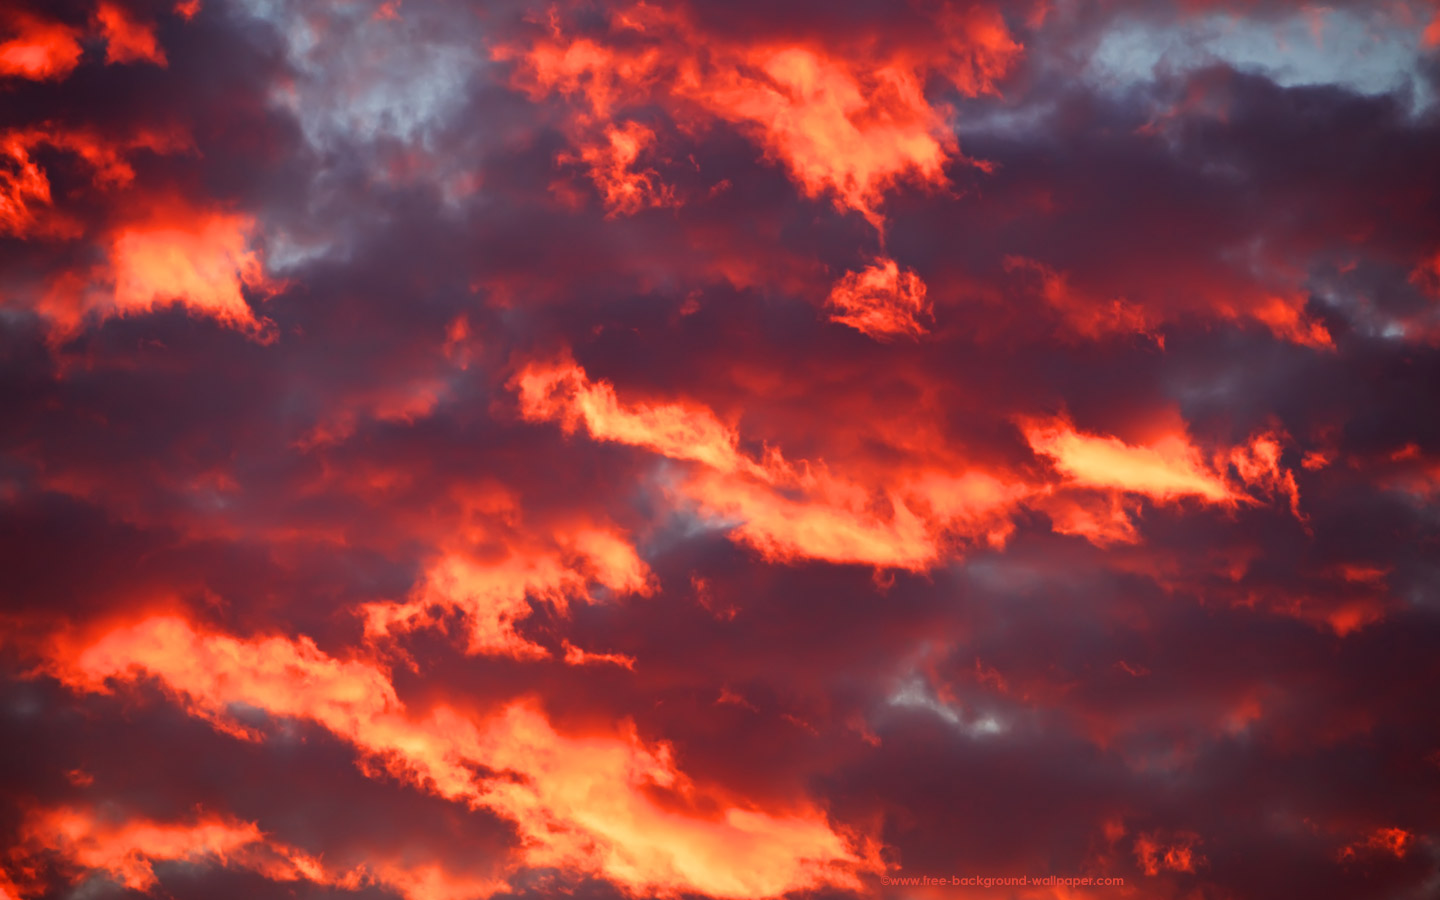 burning wallpaper,sky,cloud,afterglow,red sky at morning,red